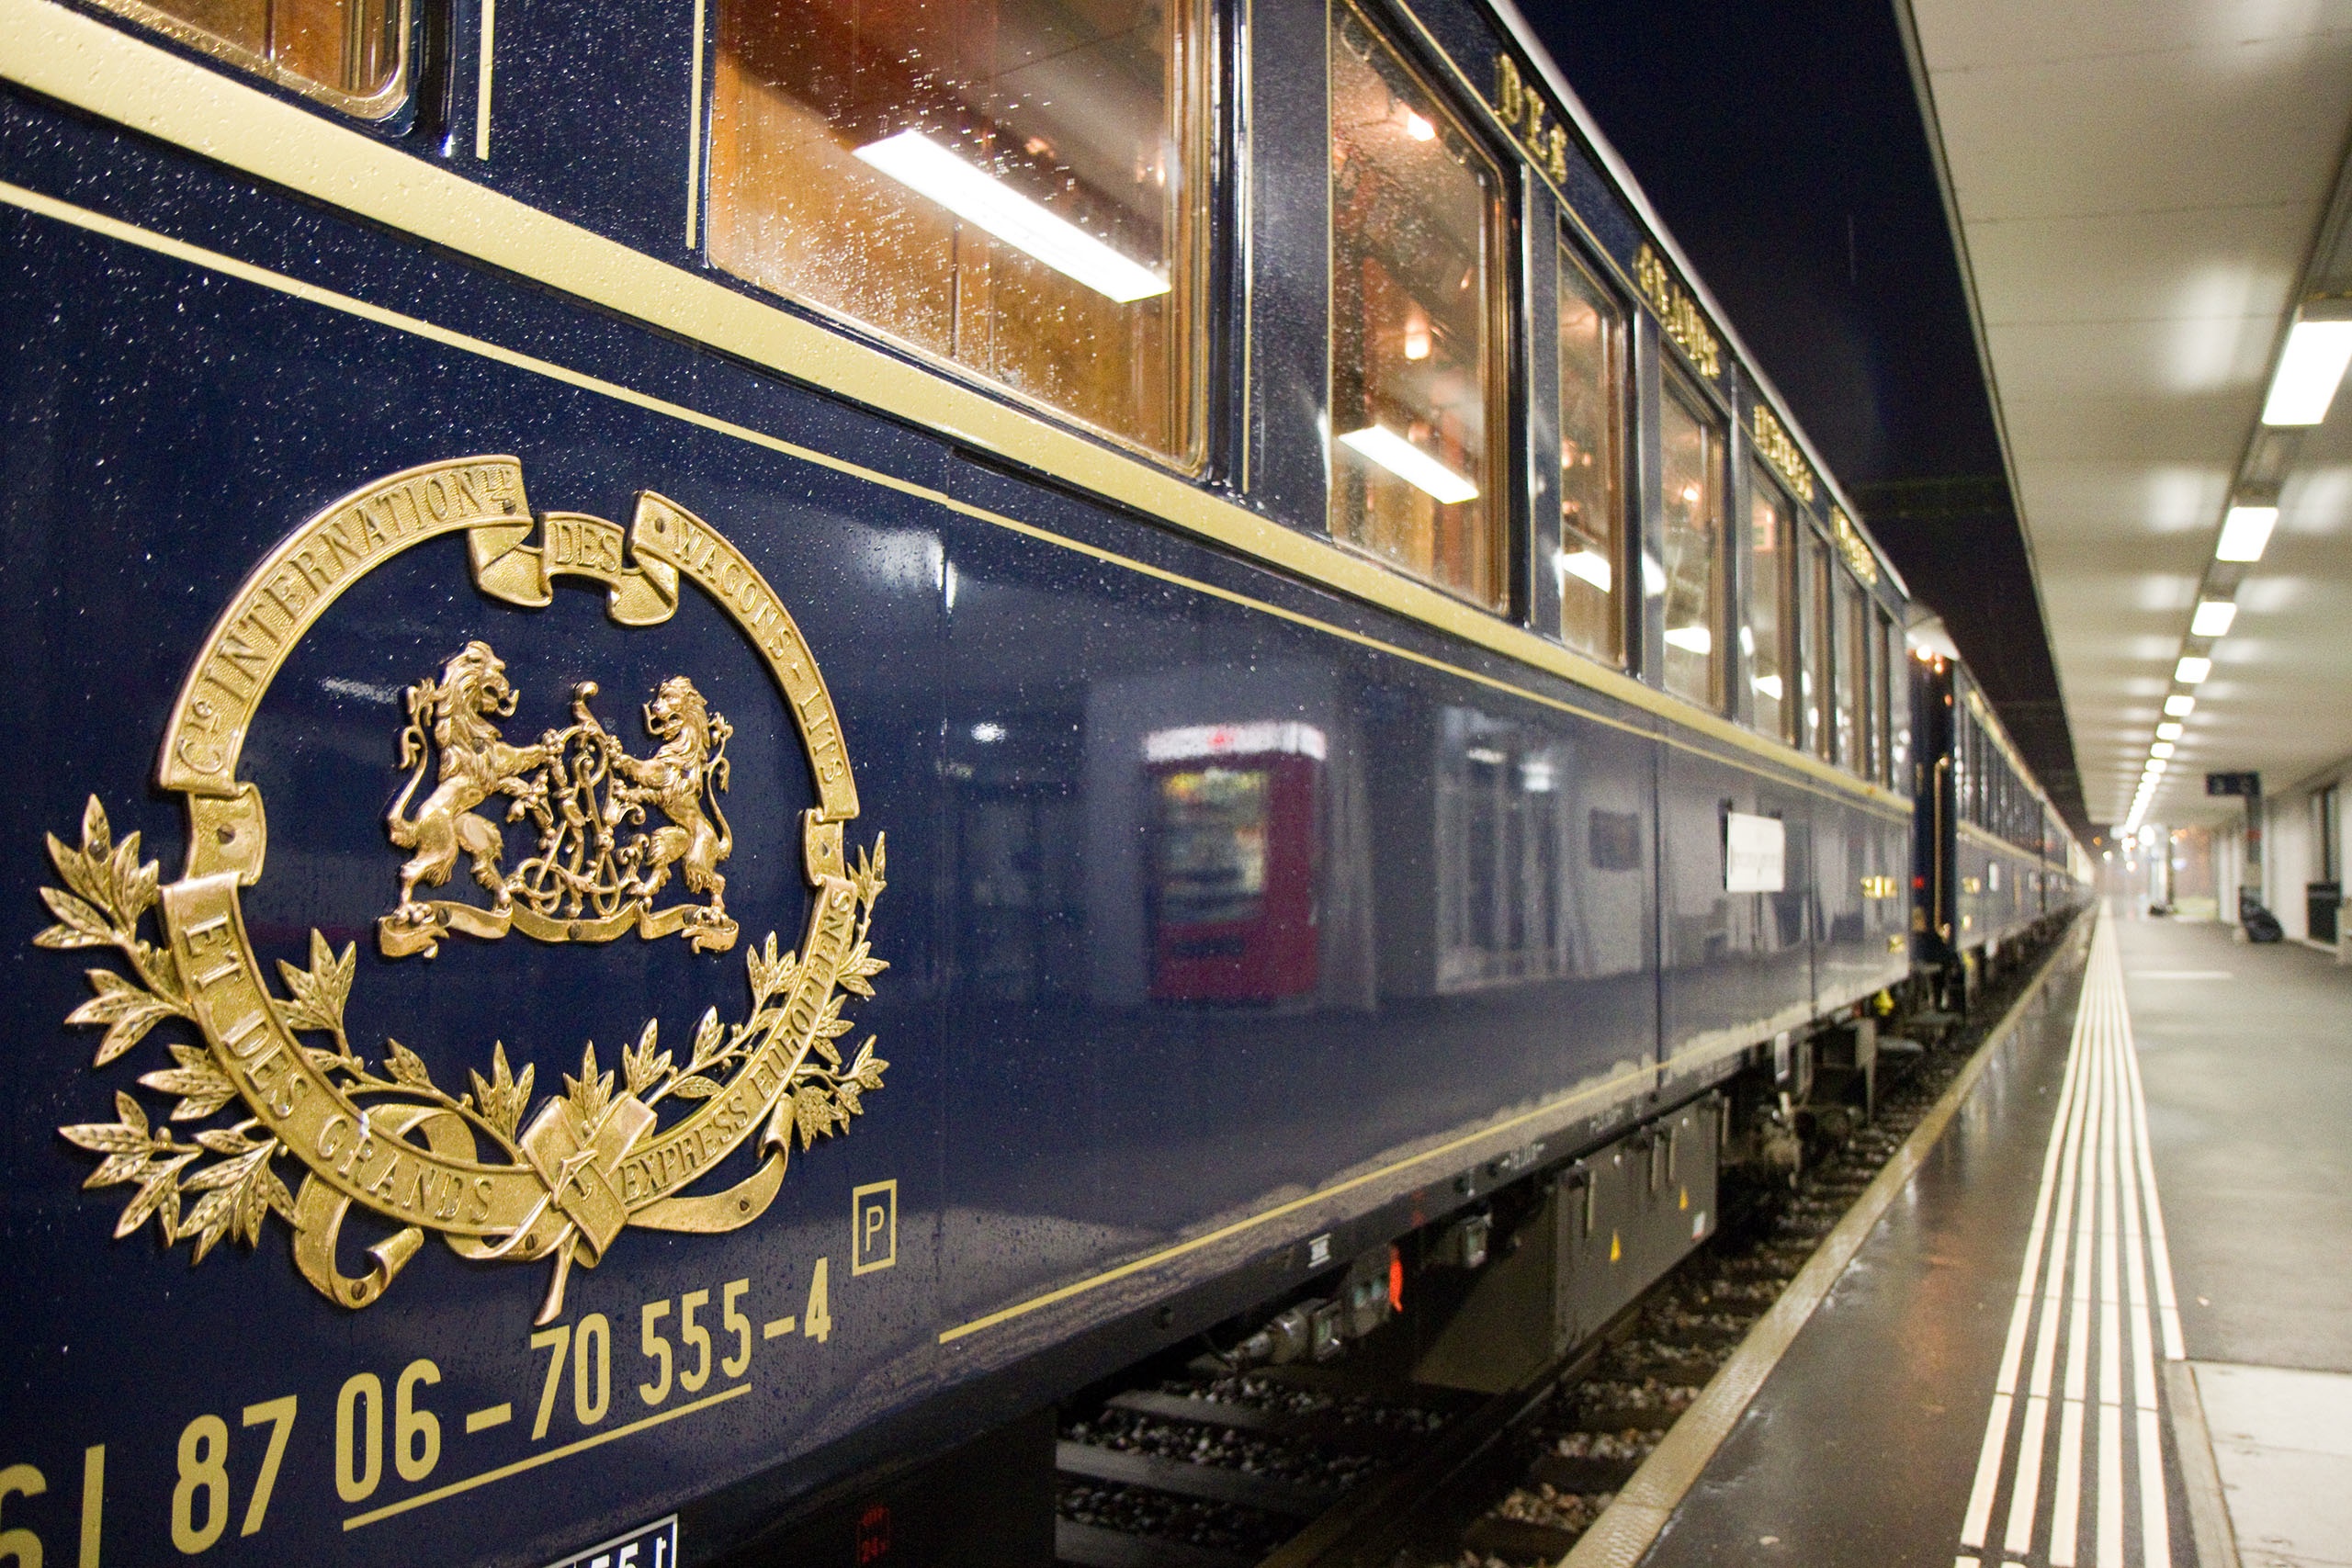 All Aboard The Orient Express